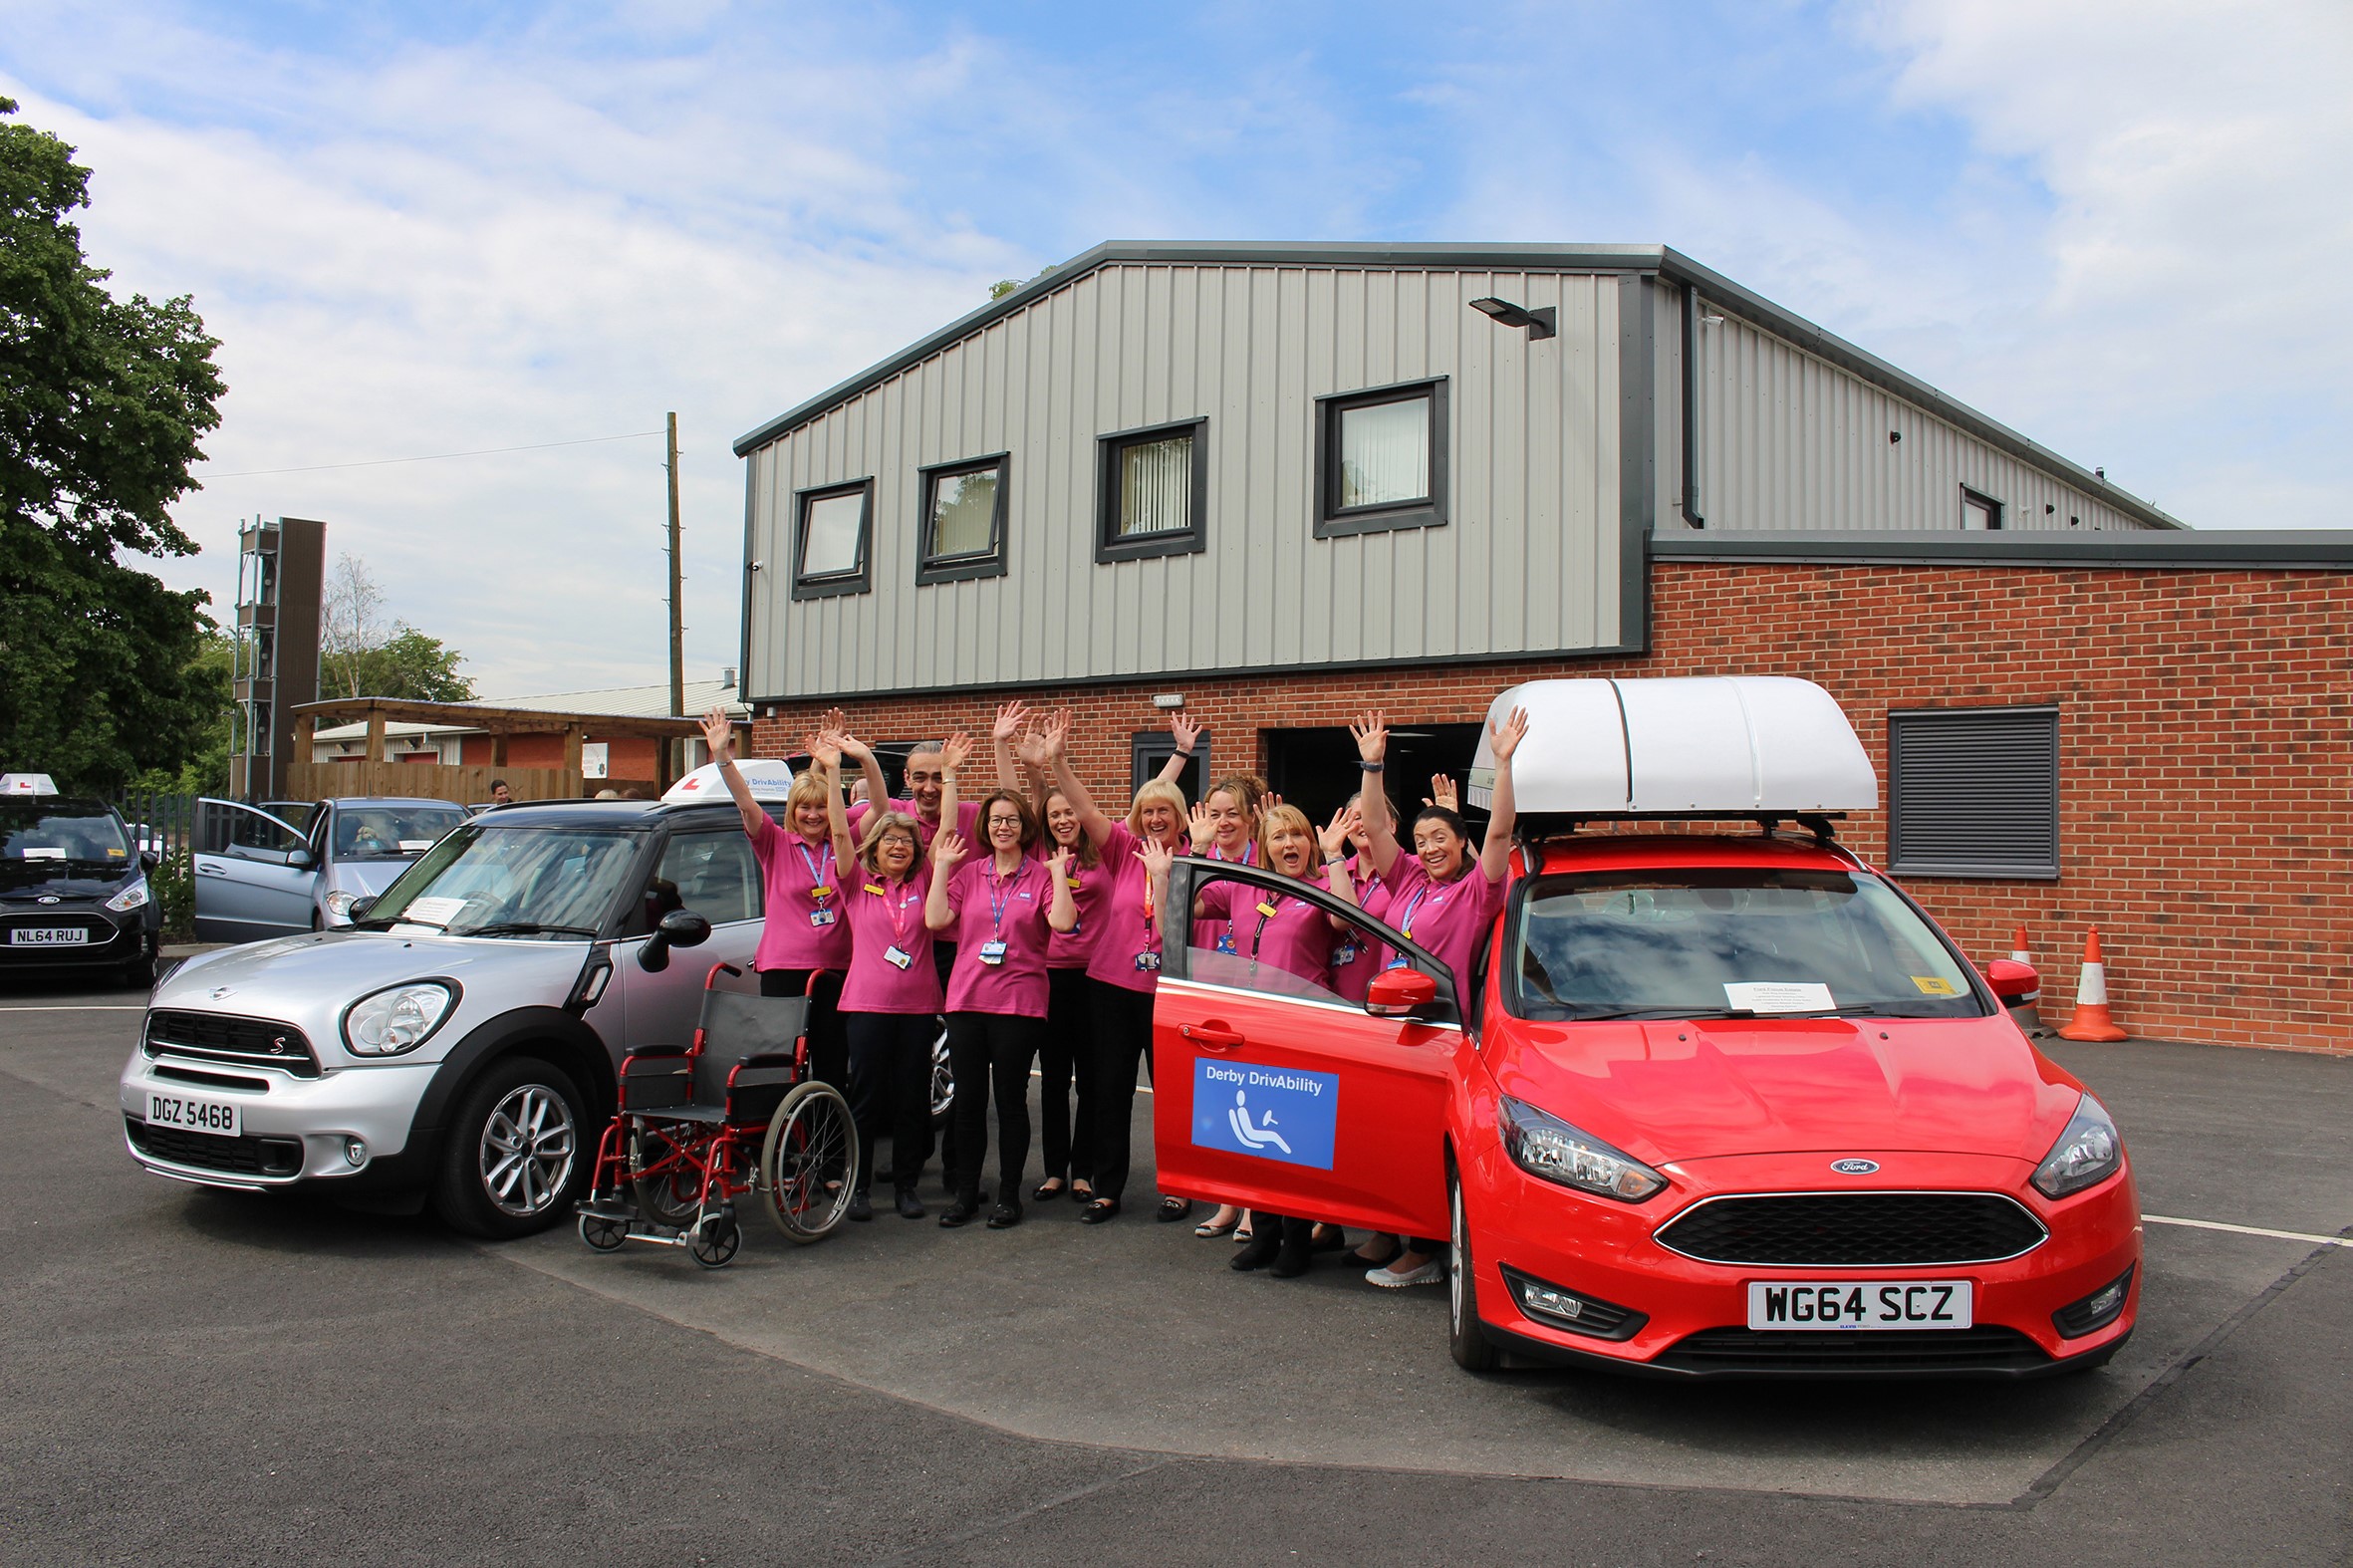 Derby DrivAbility to host Open Day showcasing adaptations and equipment for disabled drivers and passengers